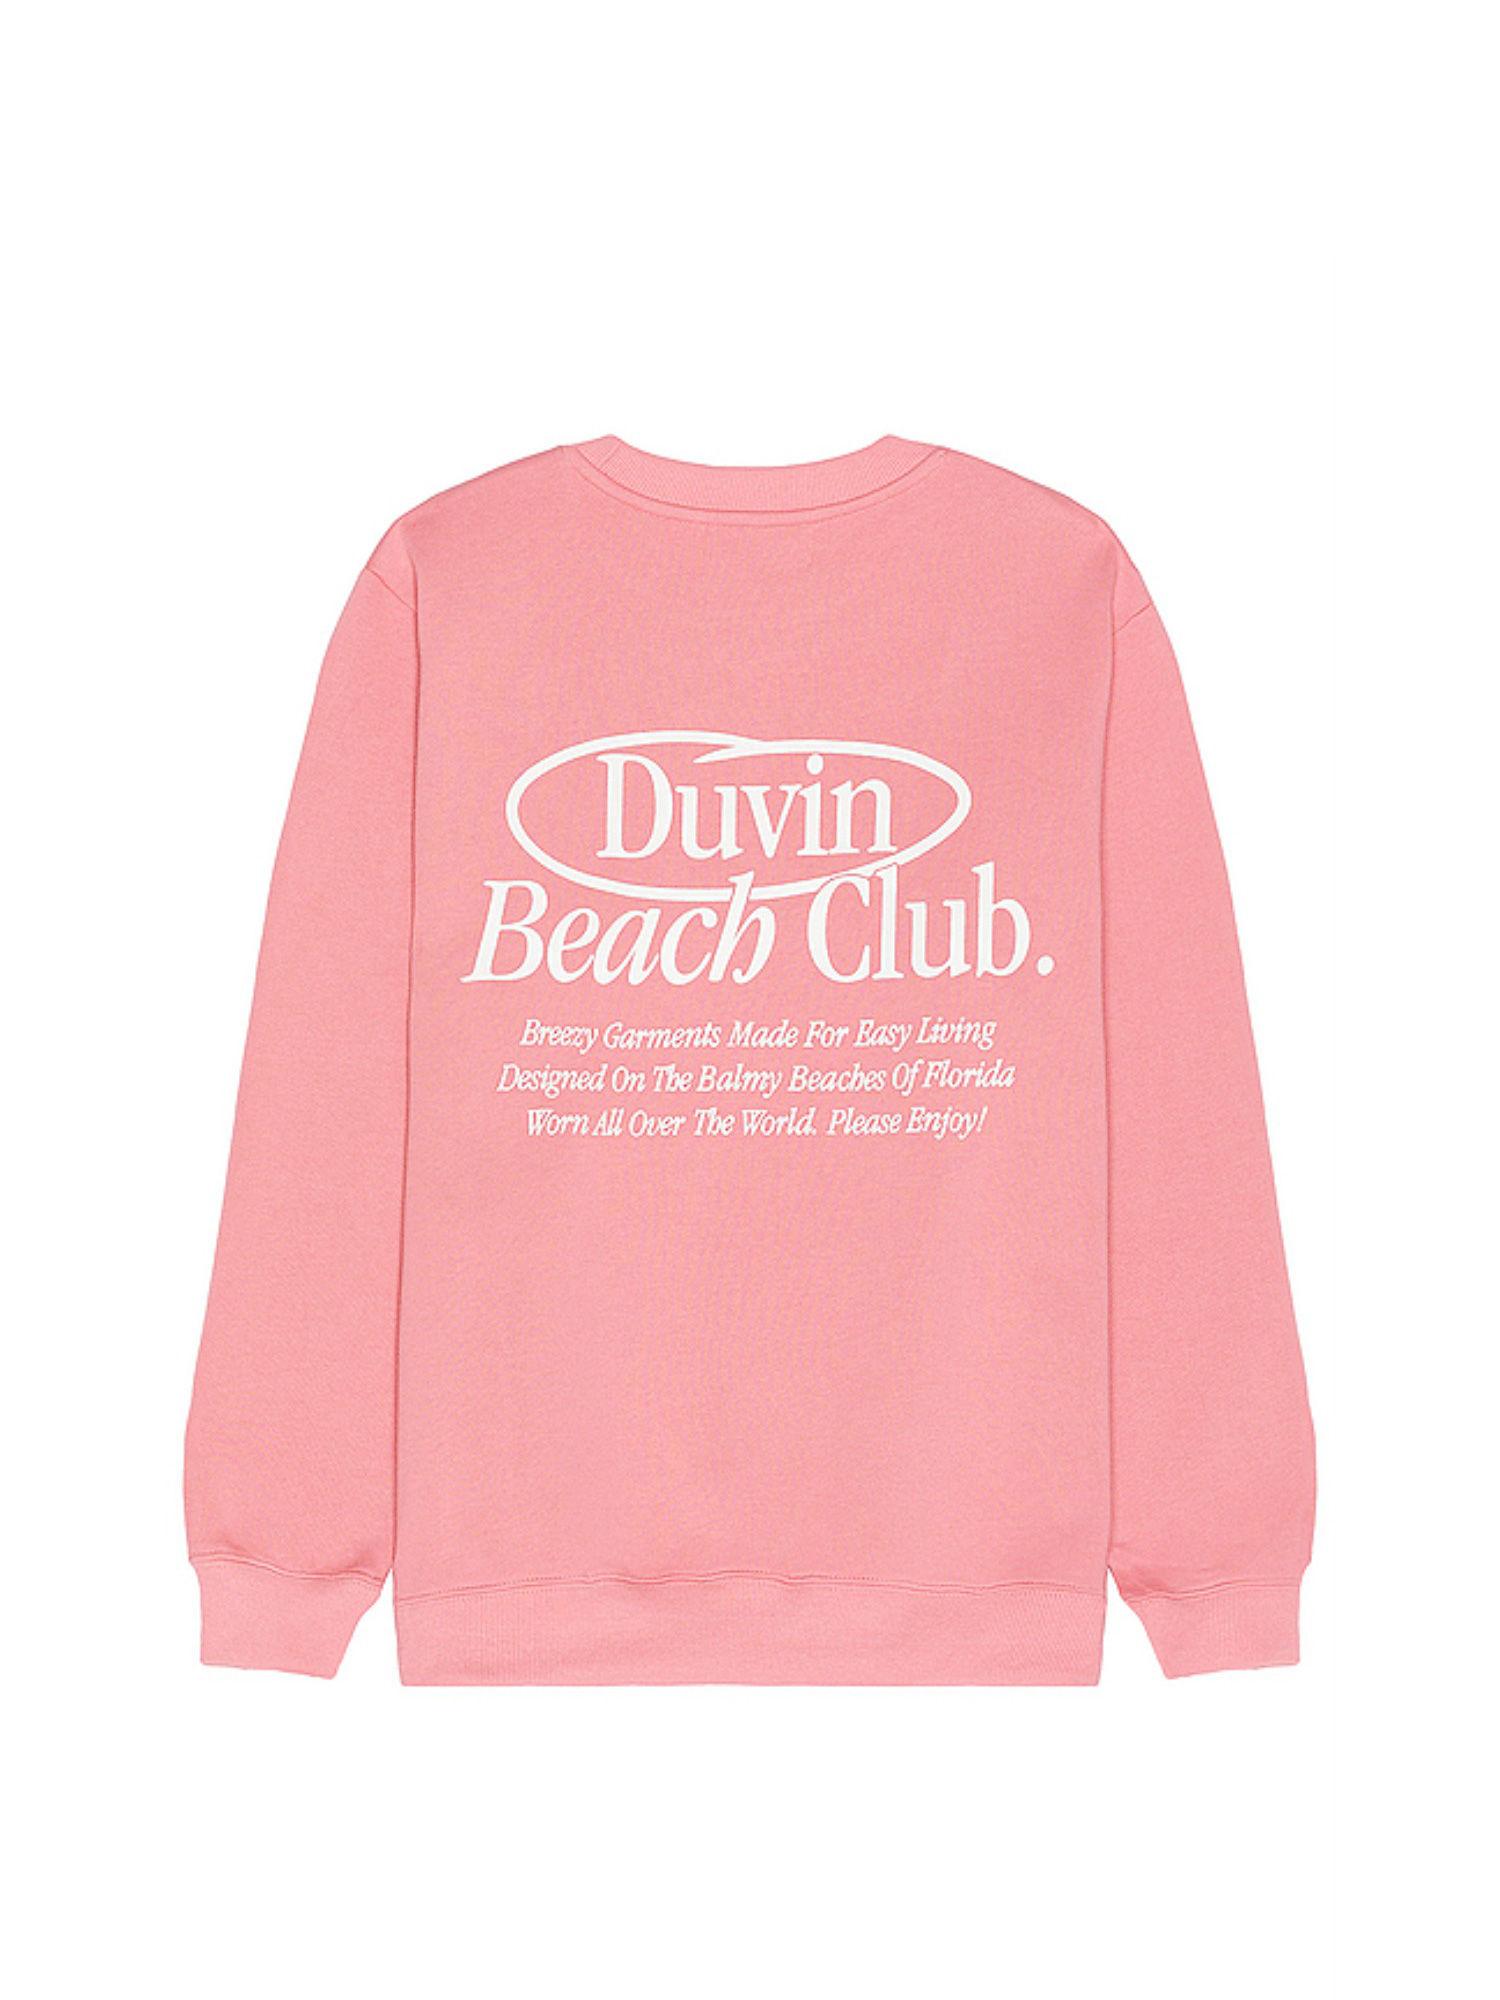 members-only-crew-sweater